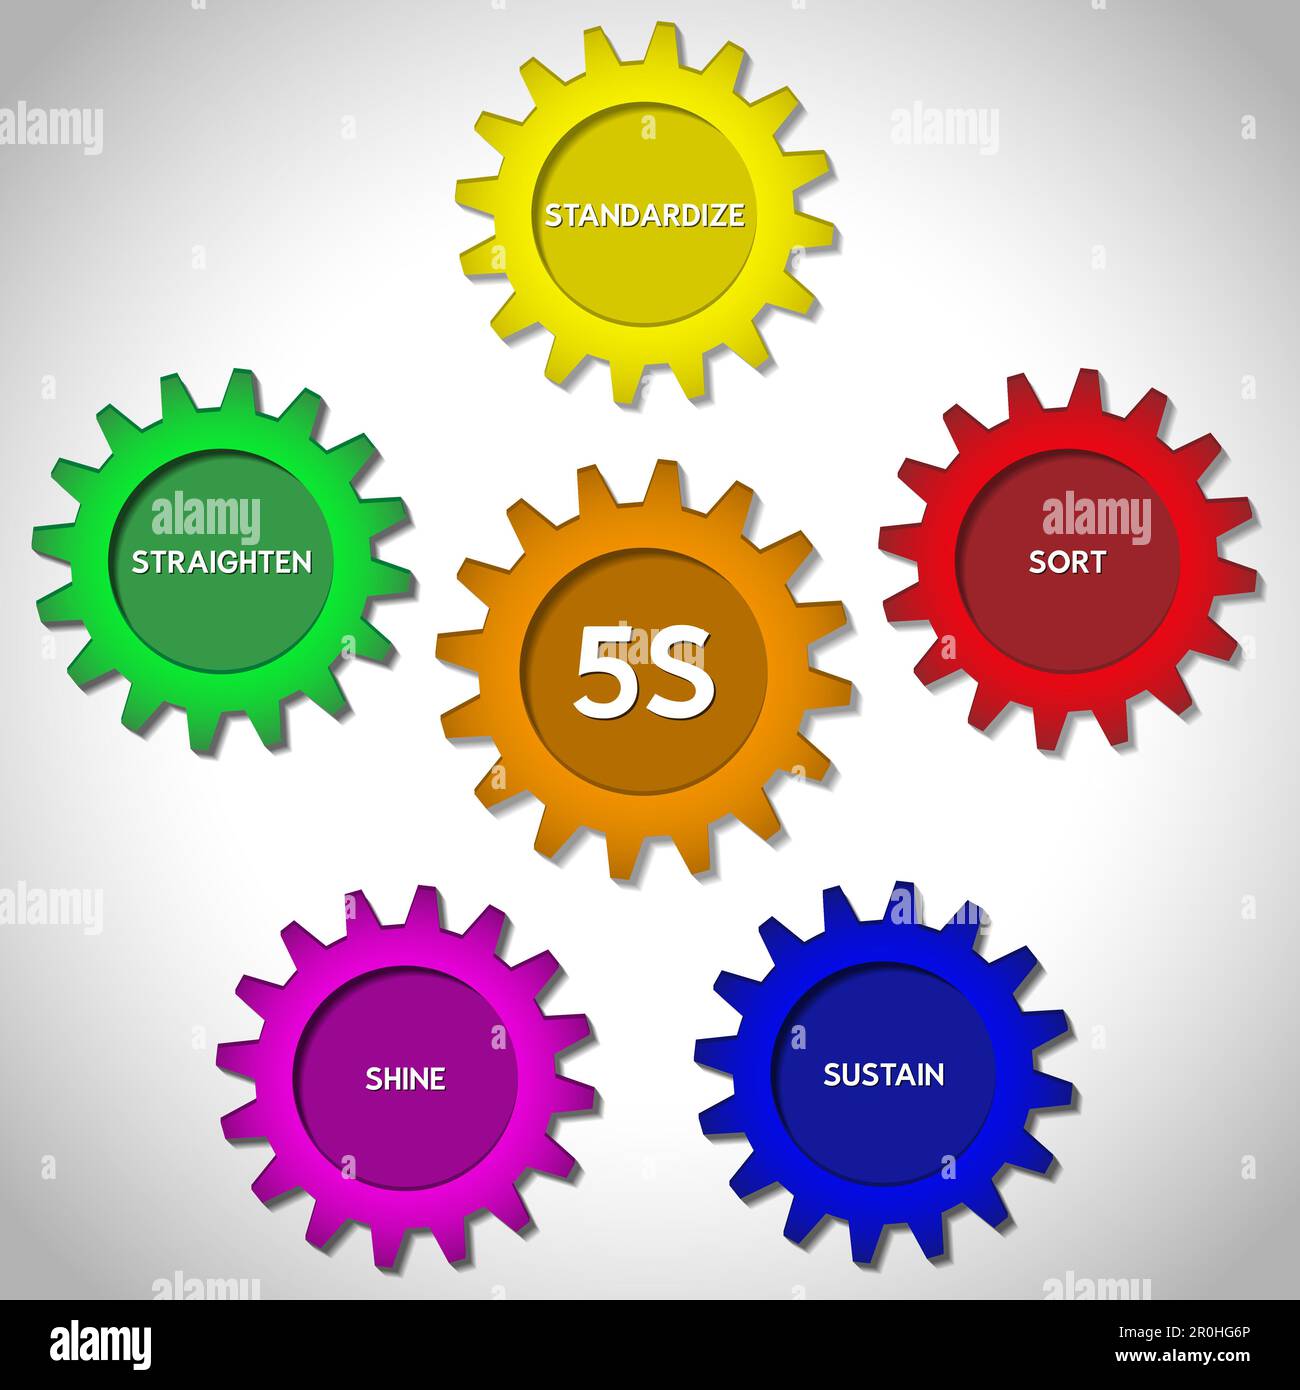 Infographic showing a method called 5s used in large enterprises. The aim of the method is a well organized and safe workplace. Stock Photo